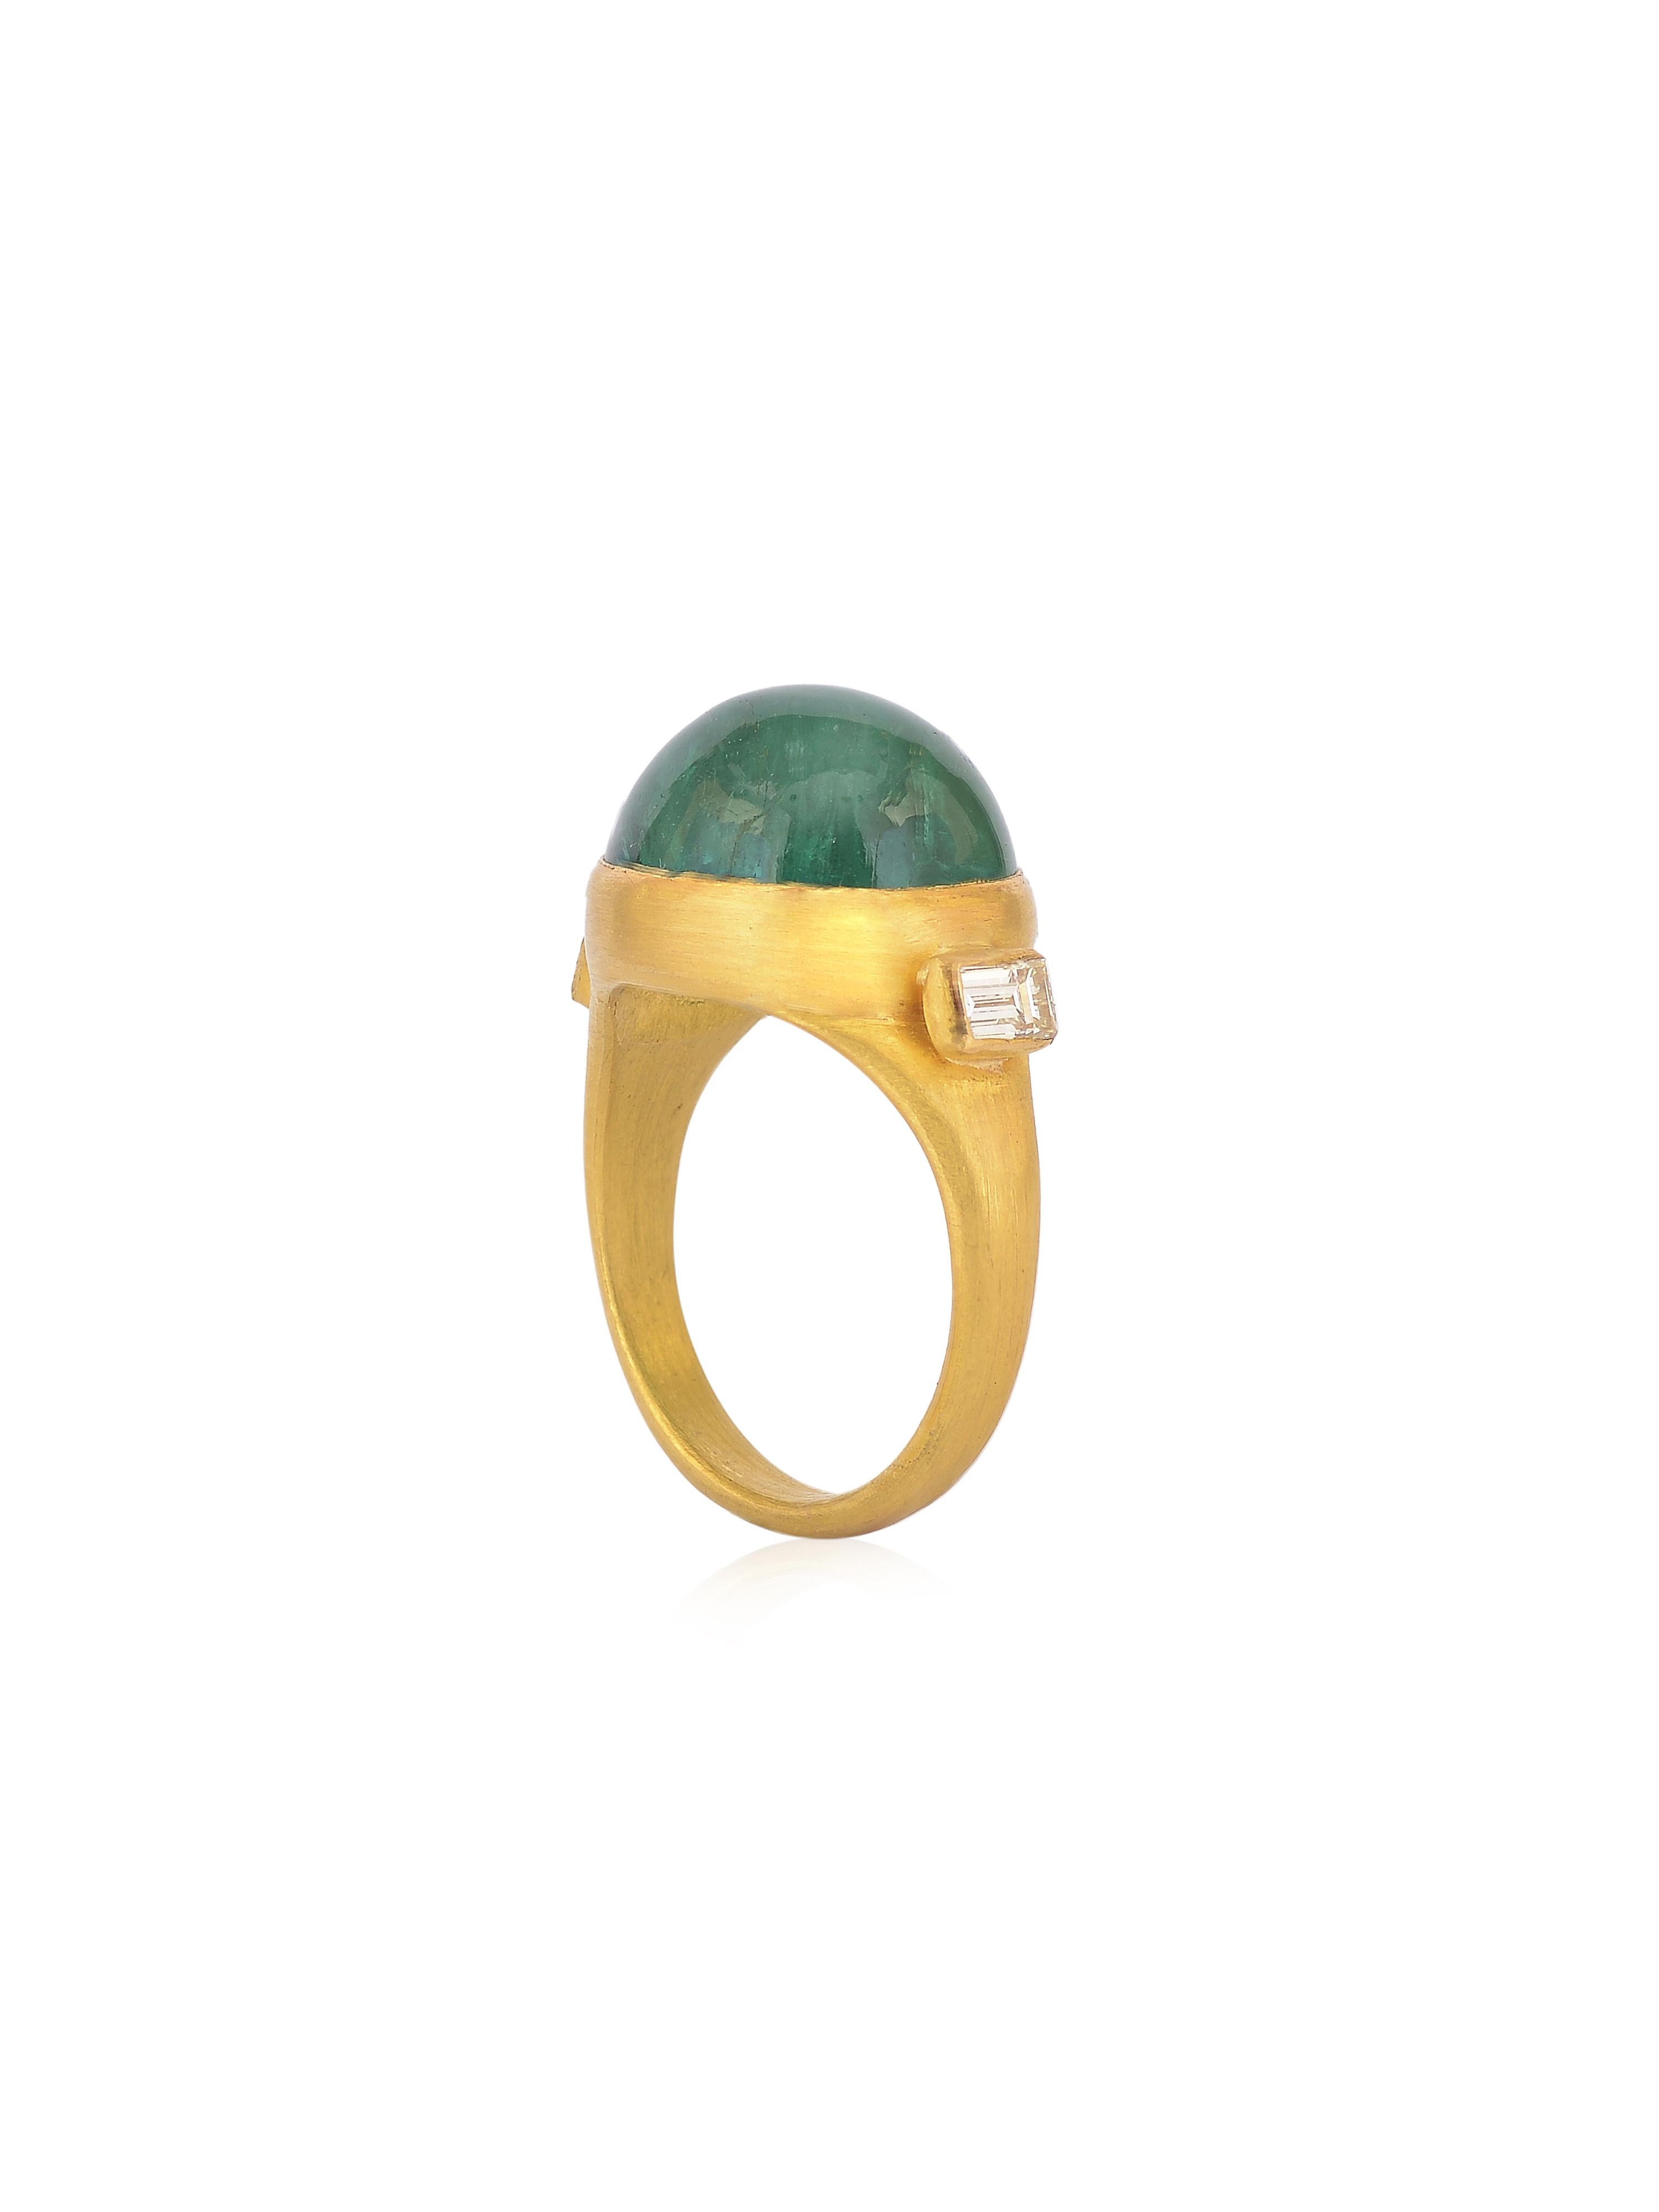 A chic Emerald Cabochon Ring with 2 Diamond Baguettes set on both side. 
The ring is handcrafted in 22K Gold with a Matte finish to compliment the color of the stones and stand out. The color of the Emerald really pops out statement ring. The centre